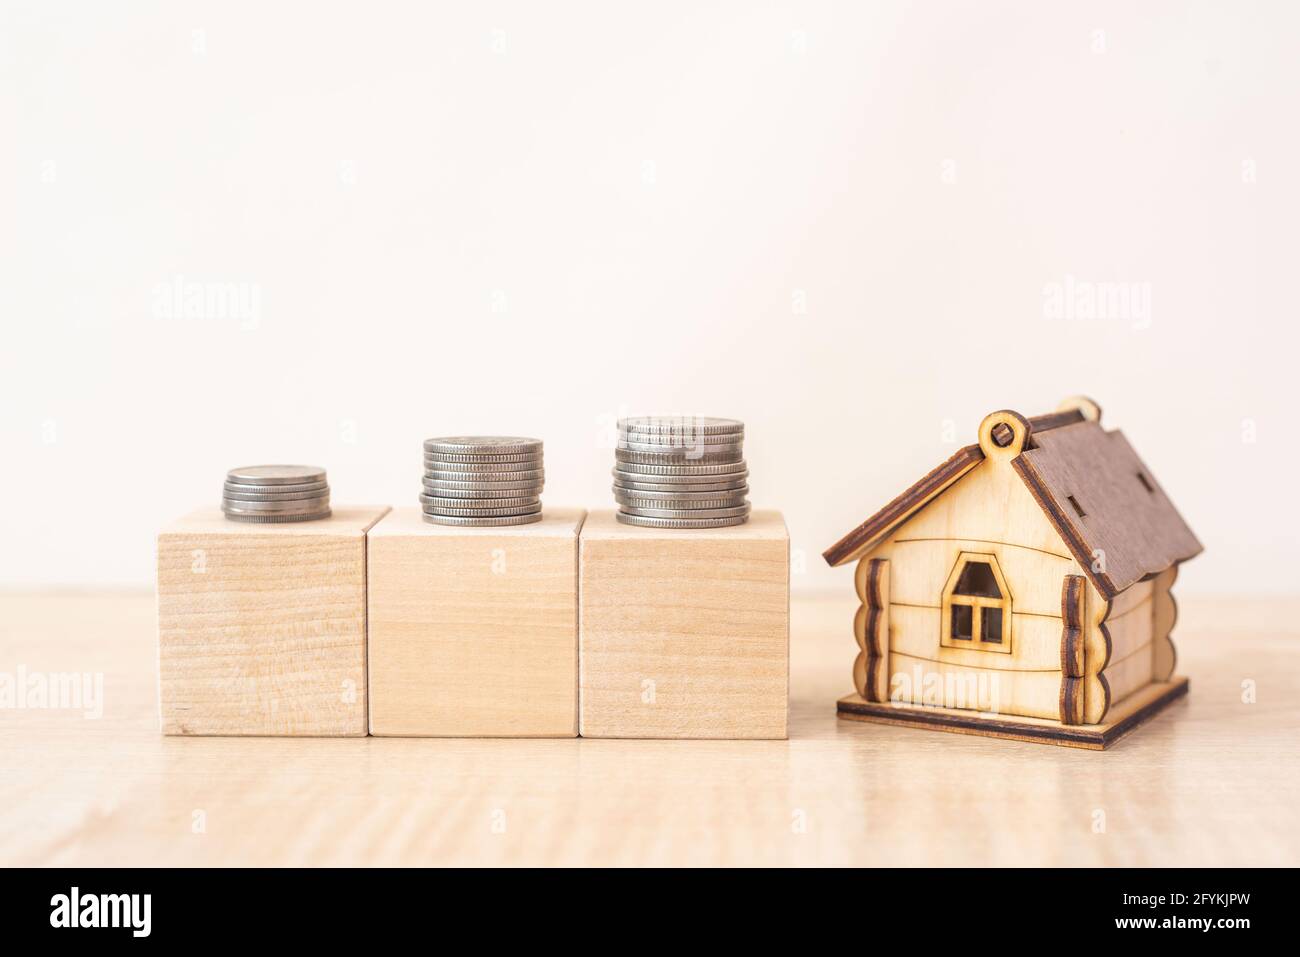 Model of house with stacks of coins on wooden blocks on beige table Stock Photo